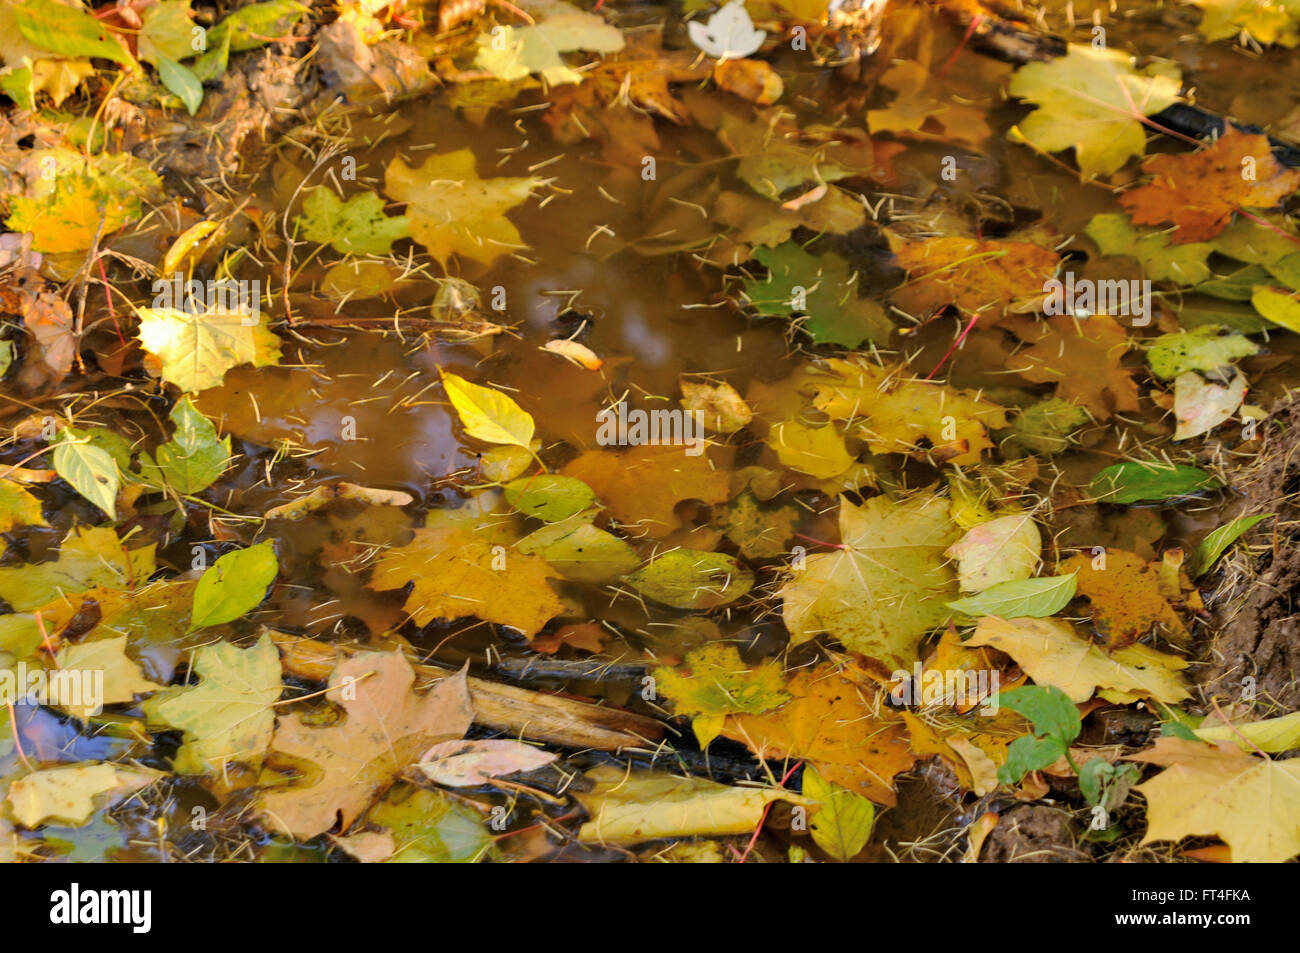 Fallen leaves (marple, American ash-leaved maple, larch) are lying in a puddle, Moscow region Stock Photo